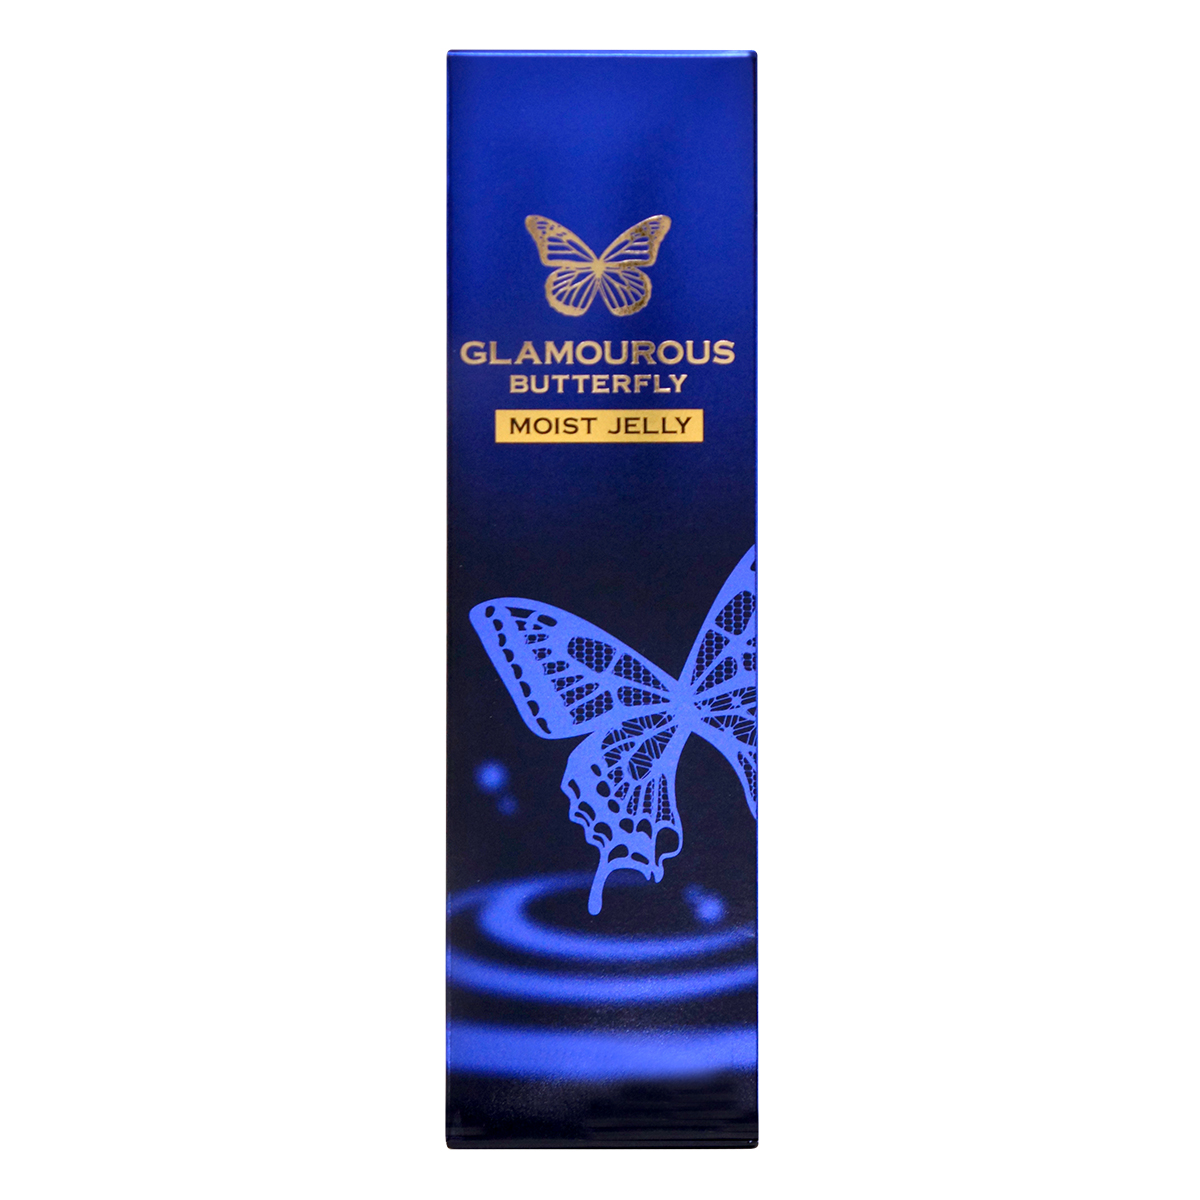 Glamourous Butterfly Moist Jelly 30ml Water-based Lubricant-p_2